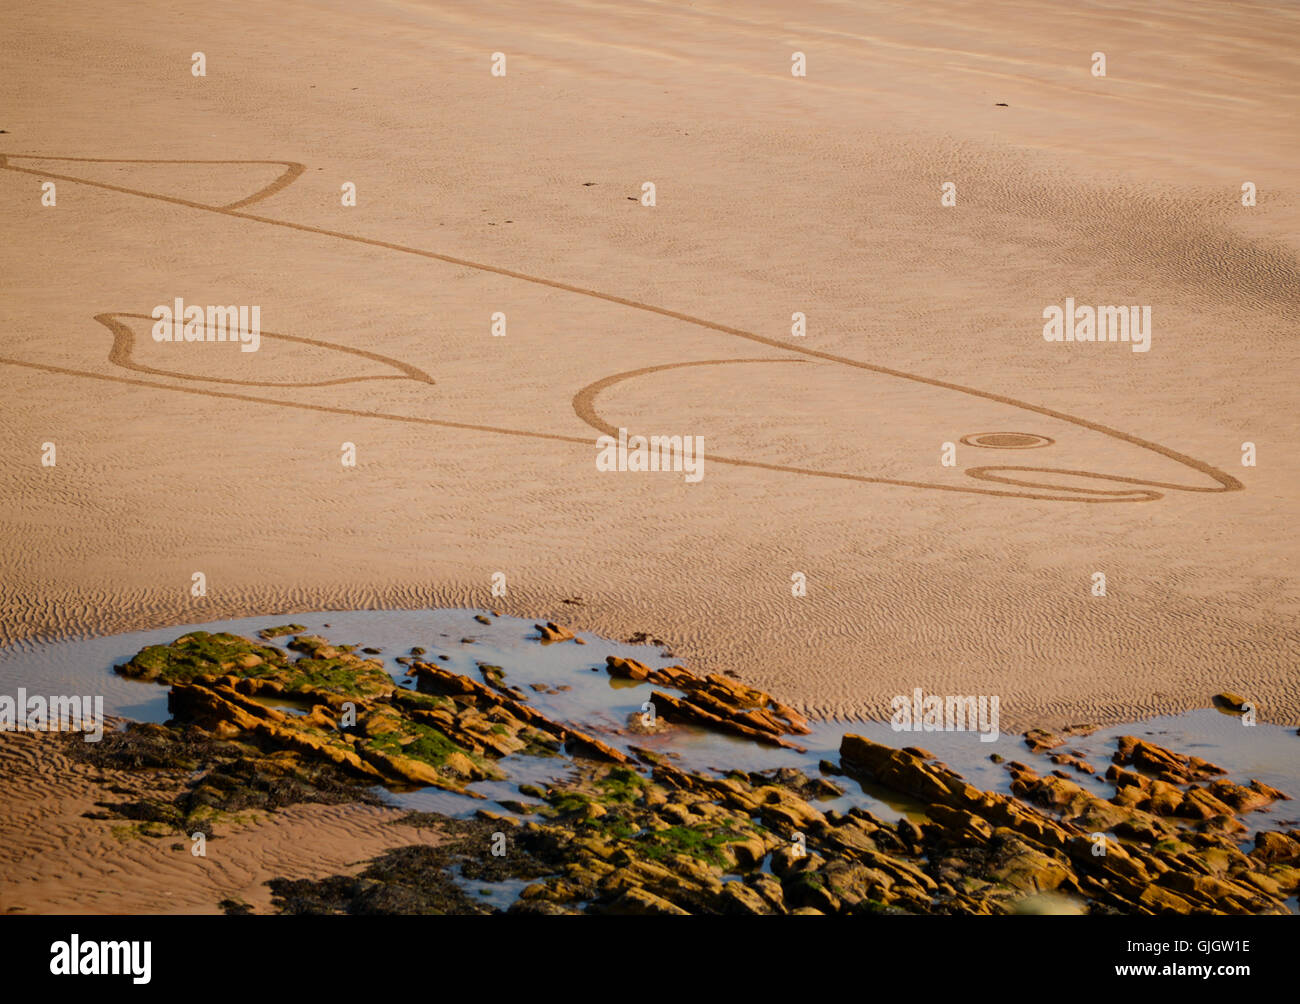 Spittal, Berwick upon Tweed, Northumberland, UK. 16 Aug 2016. Sean Corcoran, 'The Art Hand' from Bunmahon, Co. Waterford, Ireland creates massive sand art drawings with a rake on Irish beaches.  Following on from the success of at the Ardmore Pattern Festival, Sean’s first international assignment as a sand artist is in Spittal Seaside Festival in Northumberland.  Sean's final piece of work was a Salmon created to remember and celebrate the Salmon Fishers of the River Tweed, his 400 foot long salmon was on the site of Huds Head fishery. Stock Photo